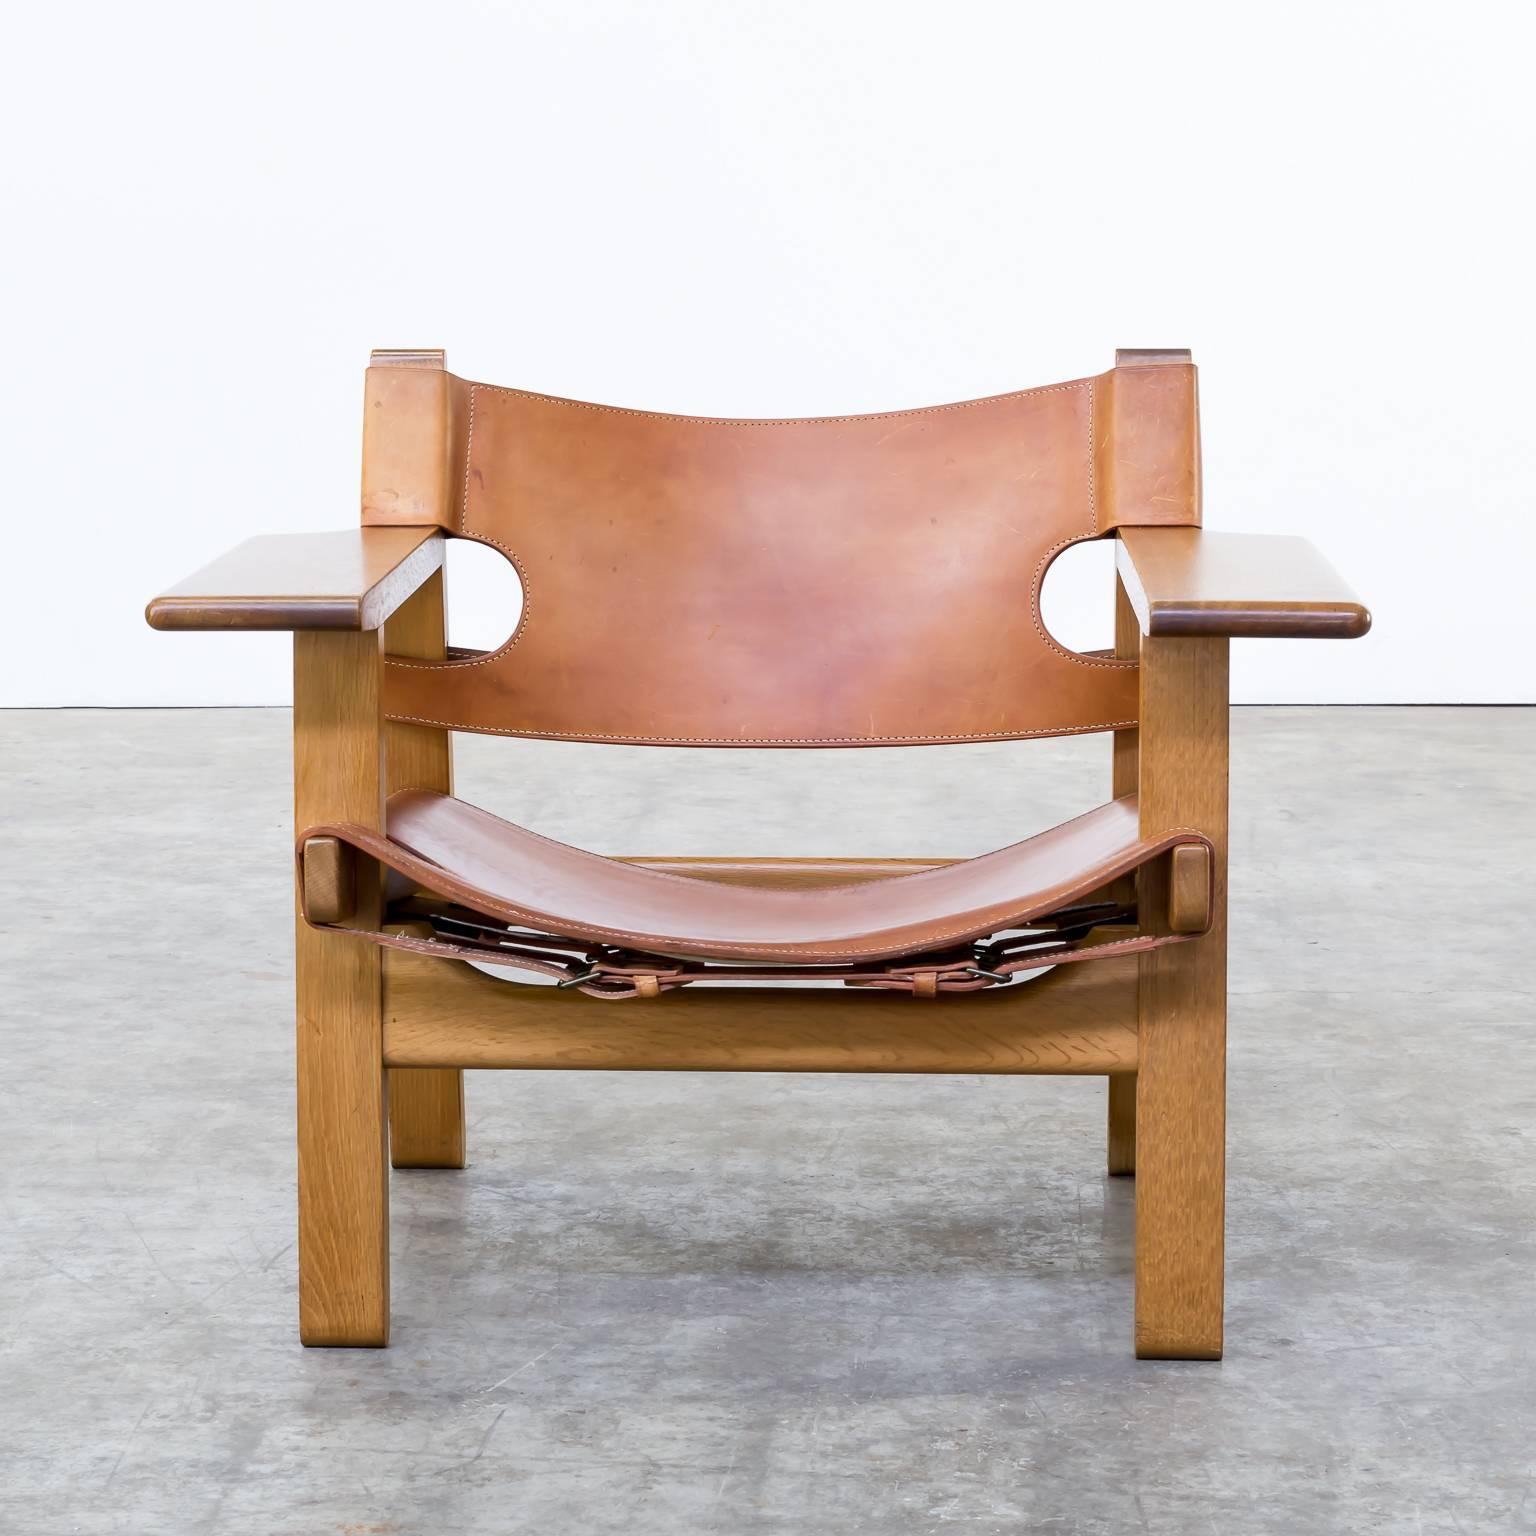 1970s Børge Mogensen ‘Spanish chair’ fauteuil for Fredericia. Oak firm frame, beautiful cognac color saddle leather. Very good condition. Wear consistent with age and use. Dimensions:82cm (W) x 59.5cm (D) x 67cm (H), seat H 28cm.